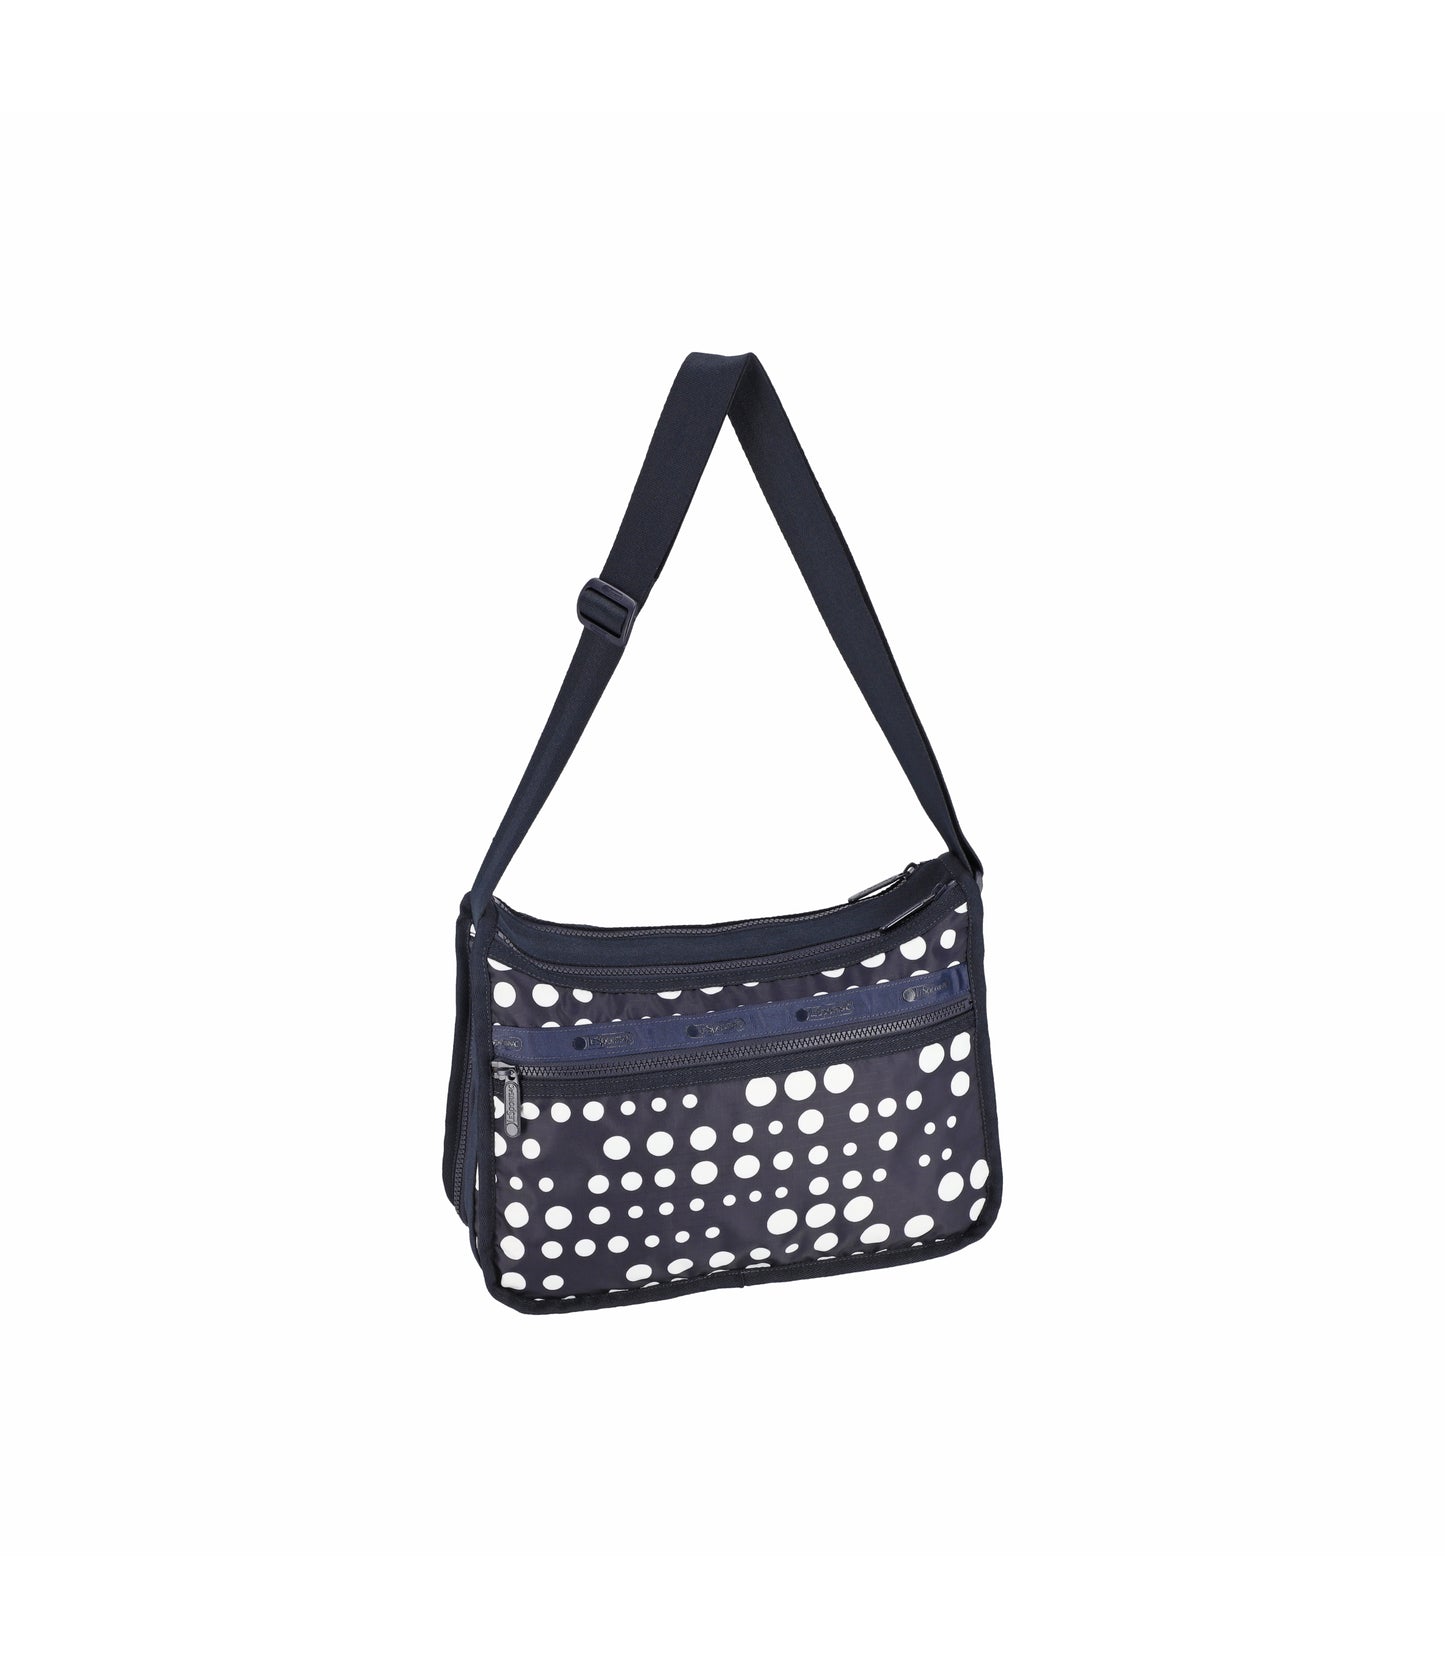 Deluxe Everyday Bag<br>LeSportsac x Libertine Dots Deluxe